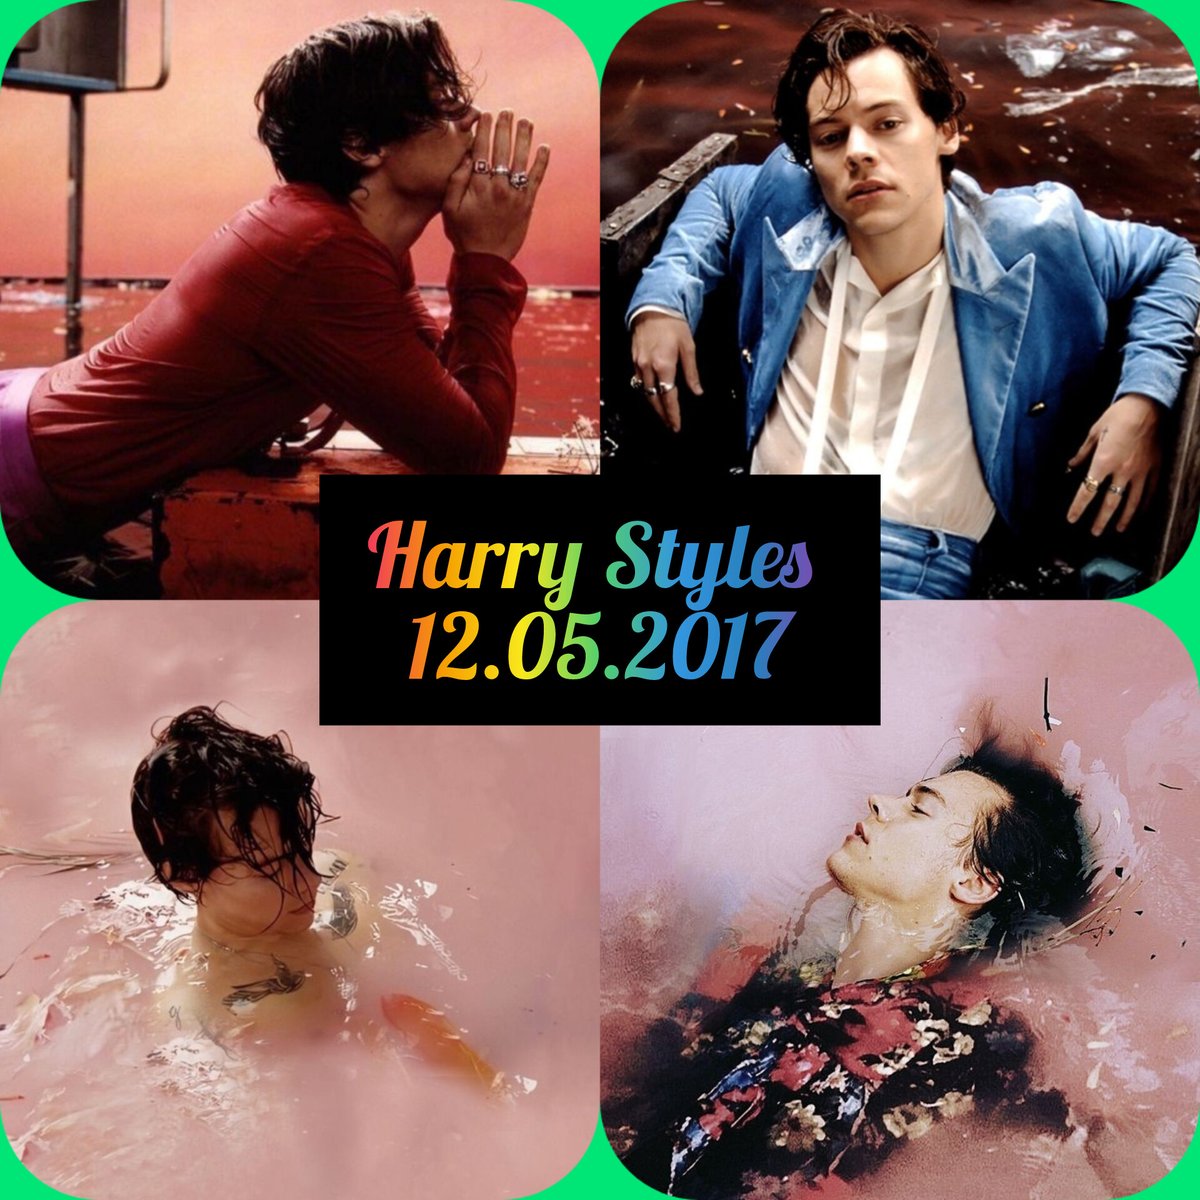 7yrs ago today Harry released his debut album 
Sign of The Times, Meet Me in The Hallway and Two Ghosts arey fav songs from it 
Here are my favourite pics from that ERA 
#HarryStyles #DebutAlbum #HS1 #harrystylesalbum